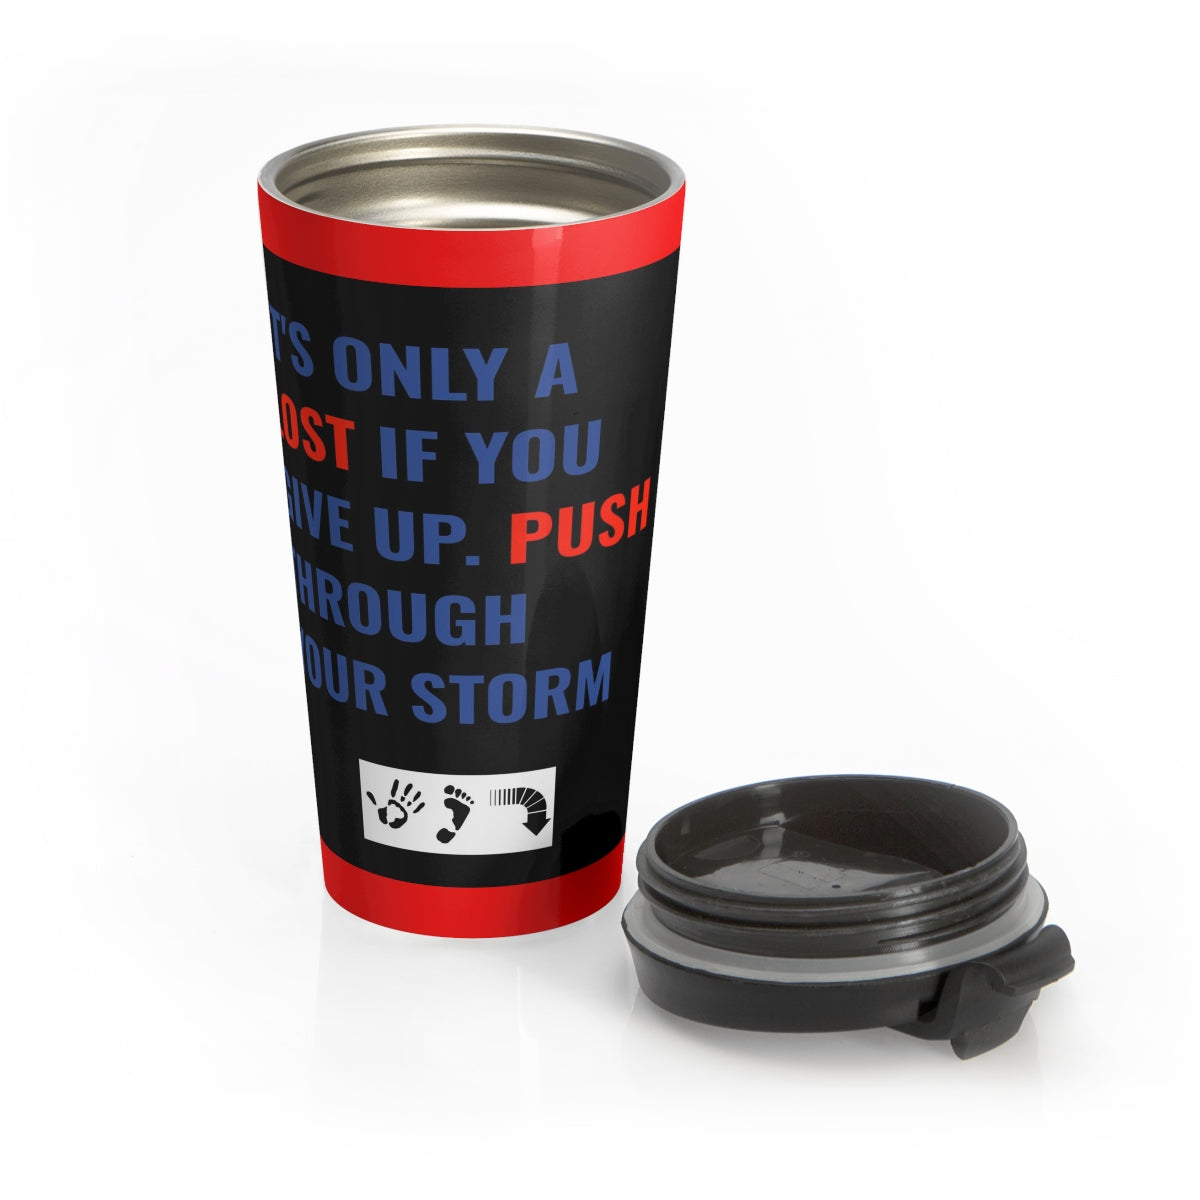 Five Toes Down Lost Stainless Steel Travel Mug